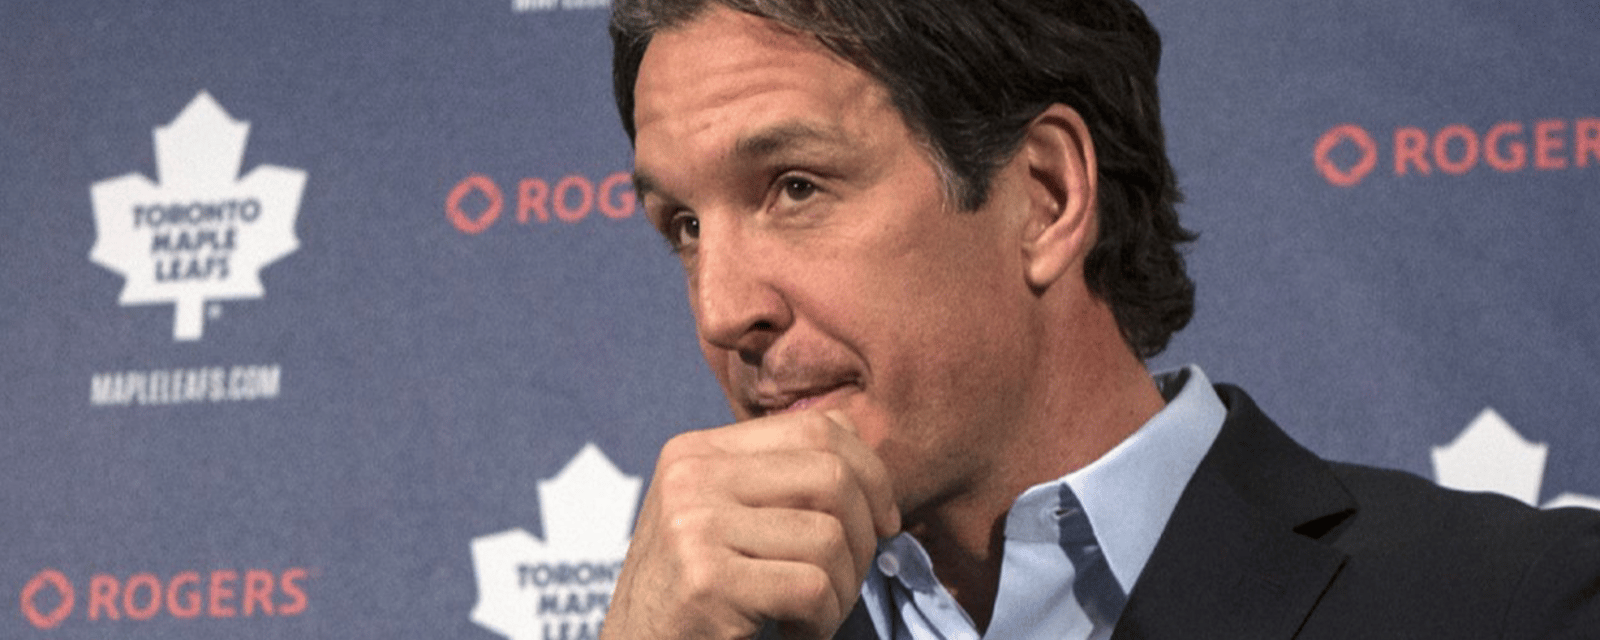 Brendan Shanahan could turn to old friend as Dubas replacement 